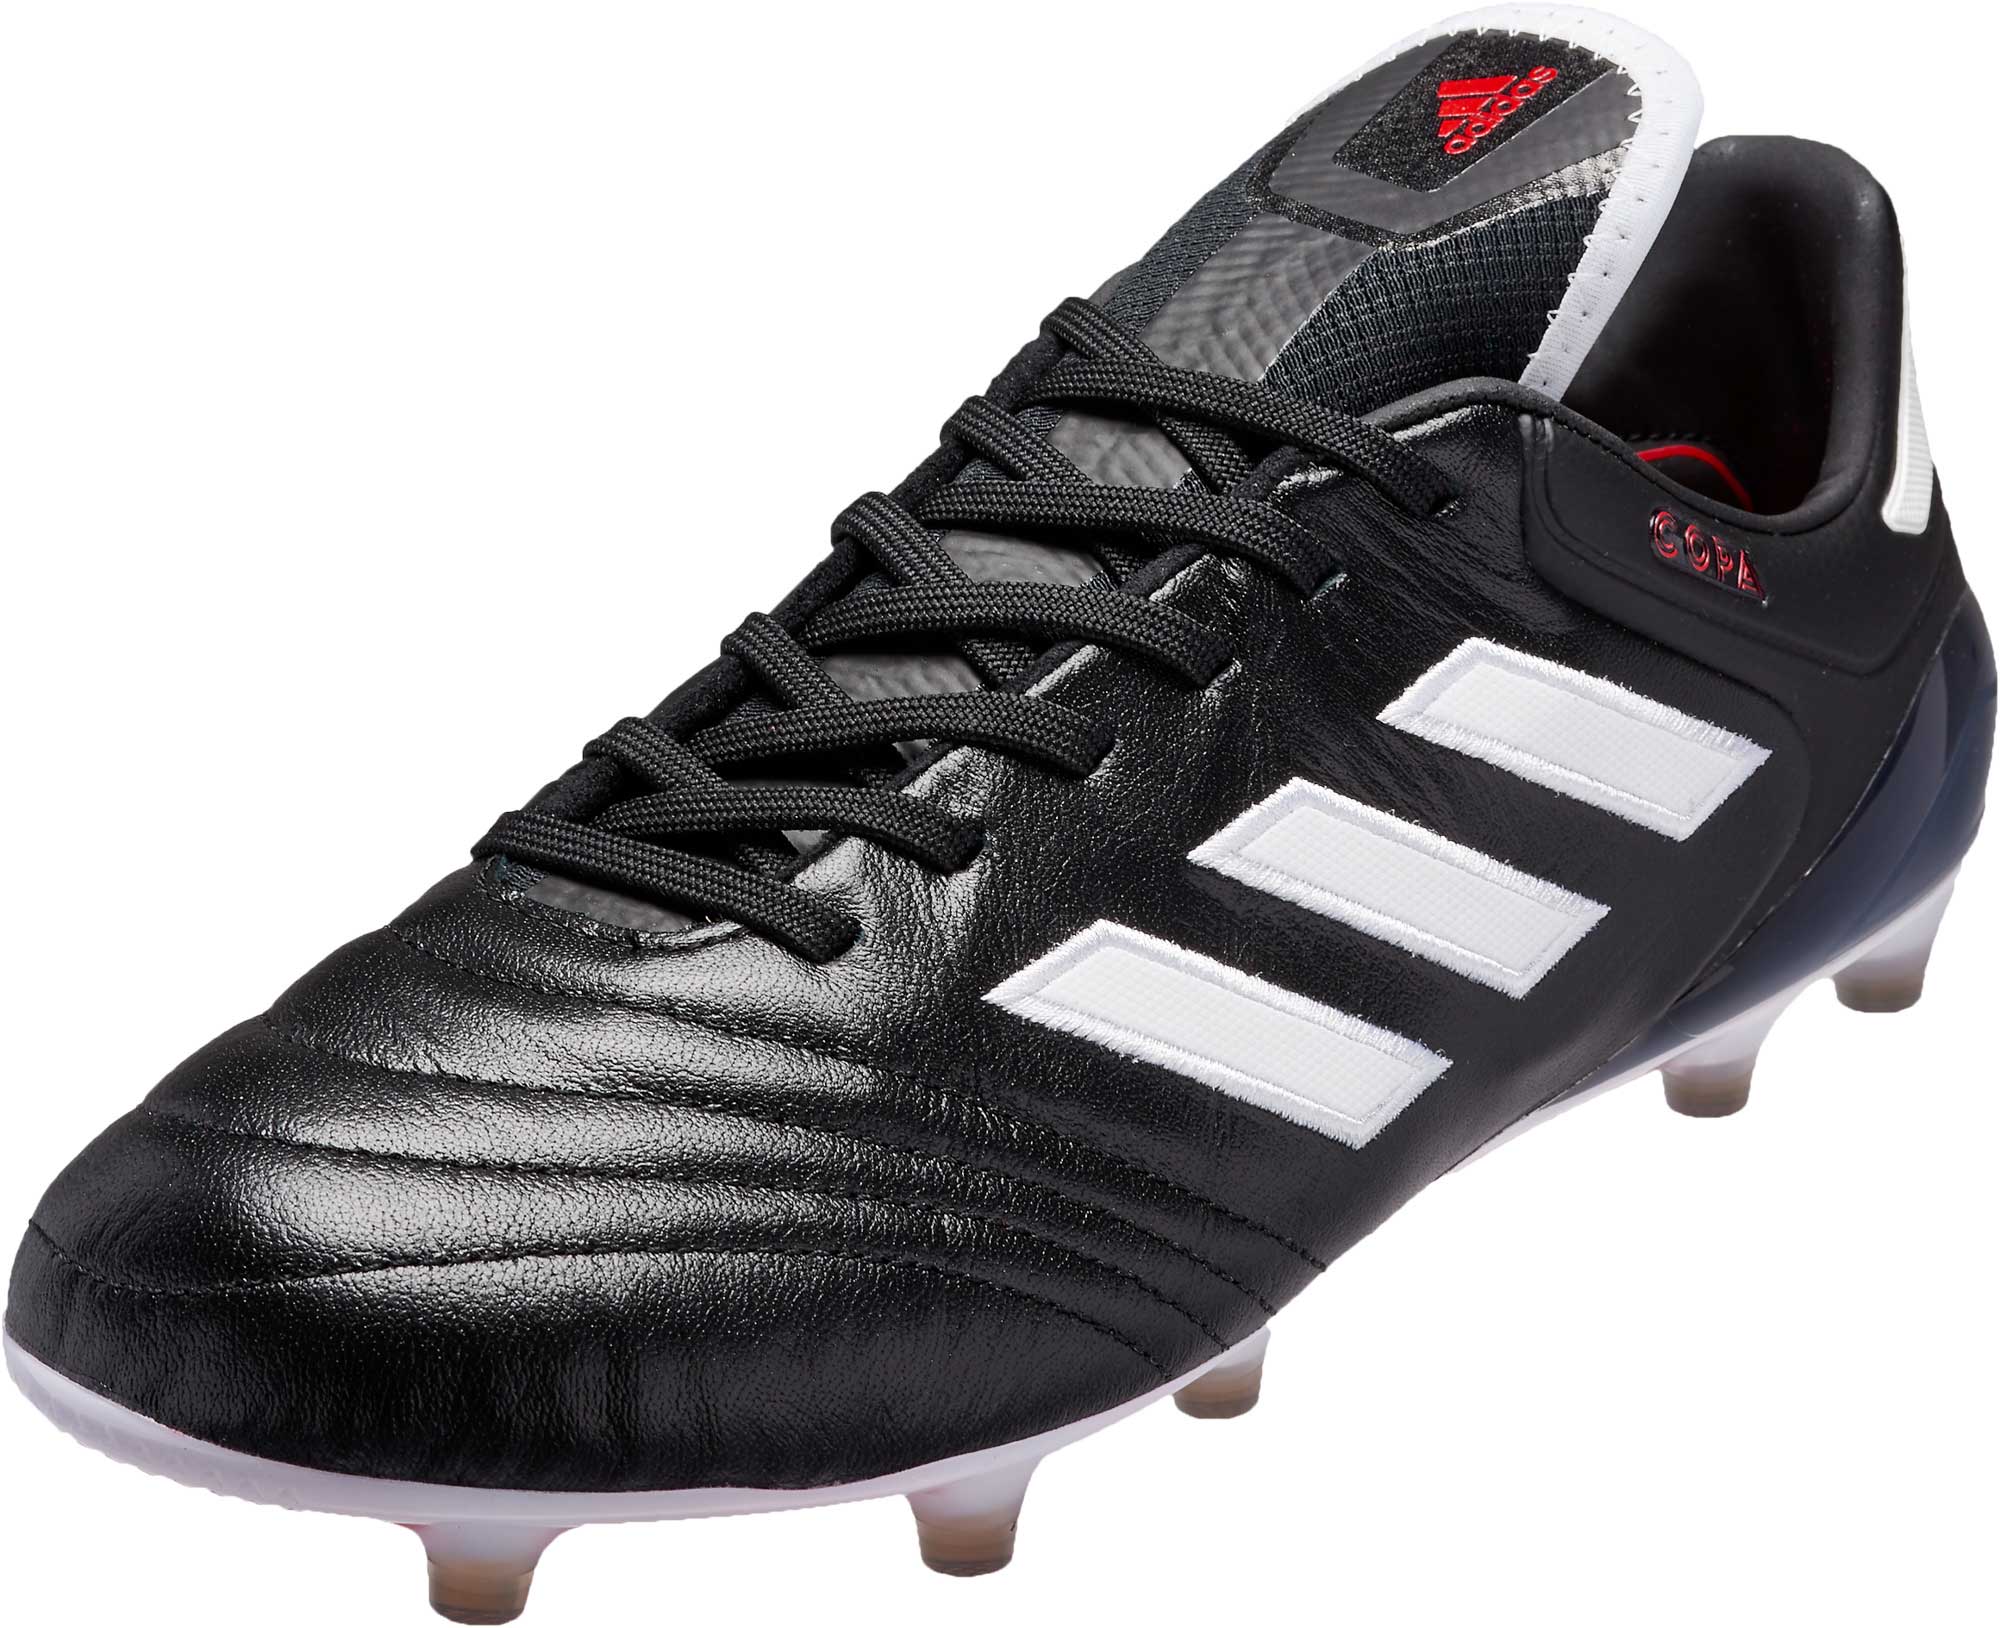 Copa 17.1 FG Soccer Cleats - Black Red Soccer Master